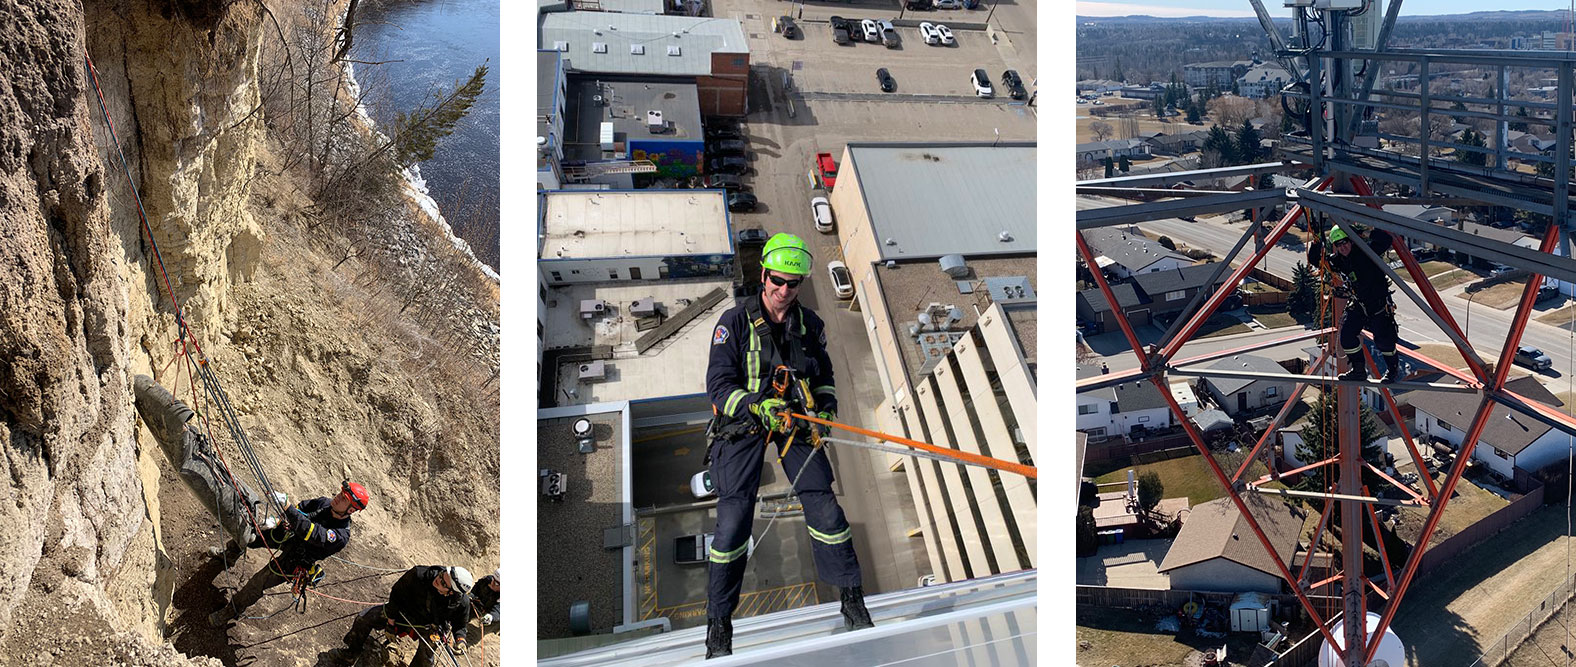 April 8 2022 - Rope Rescue Story - in story